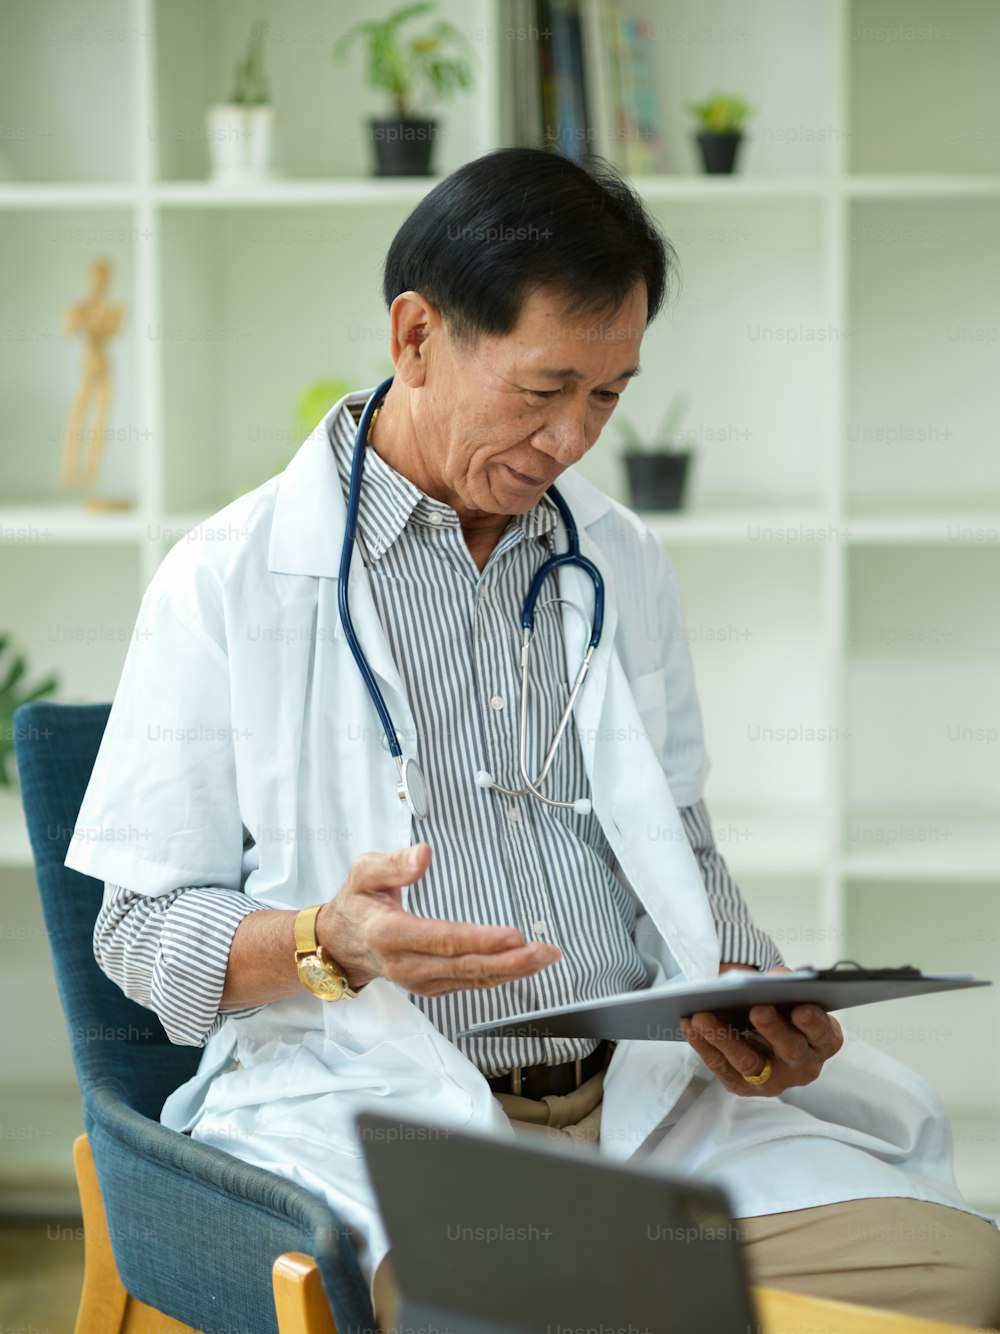 A middle-aged specialist male doctor checks and reads a treatment plan for a patient who has been injured on a medical clipboard.